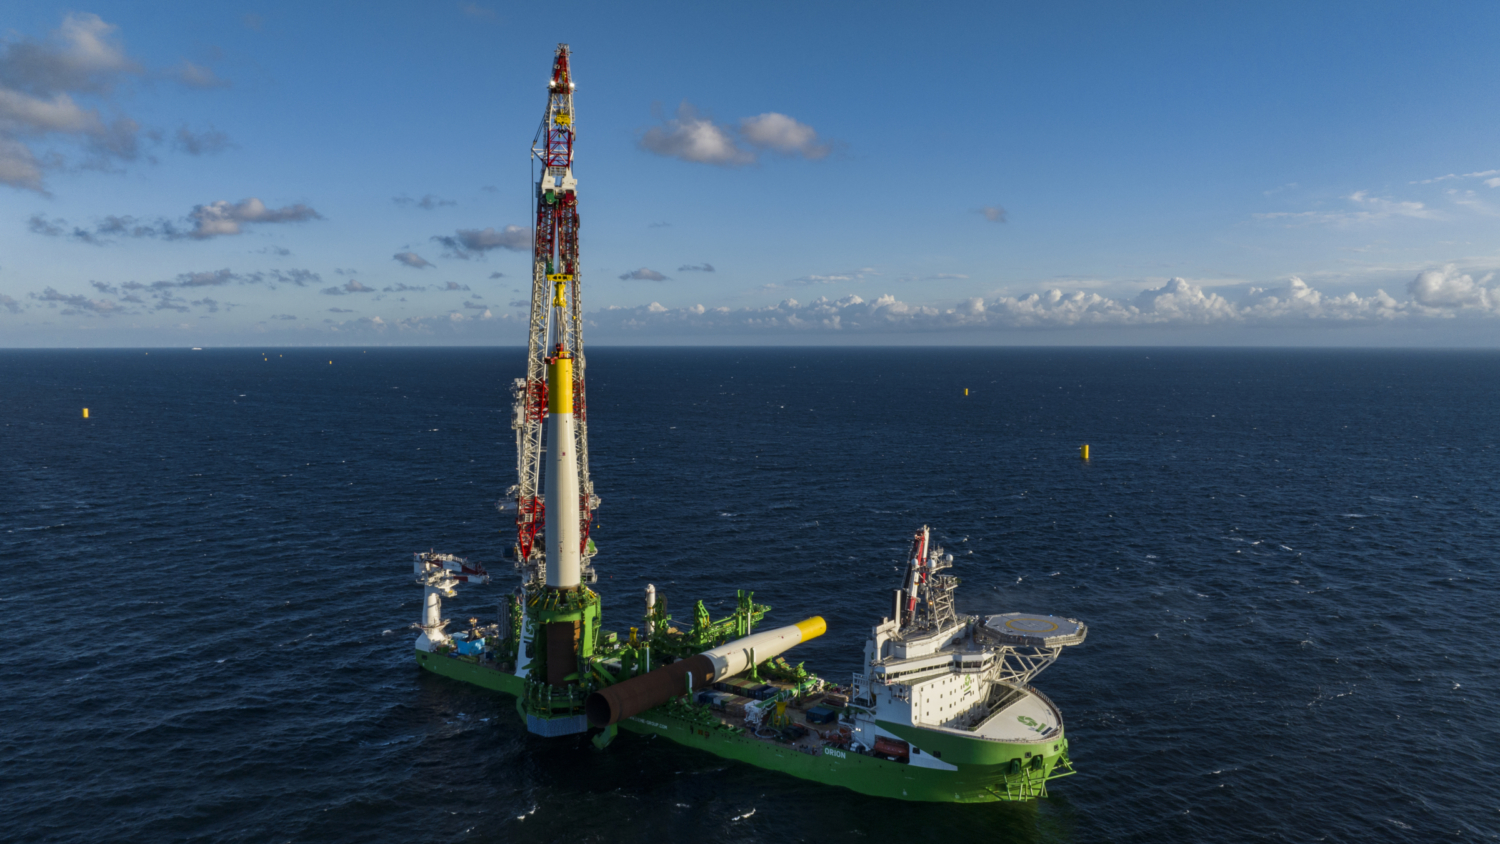 Monopile installation completed at Arcadis Ost 1 offshore wind farm